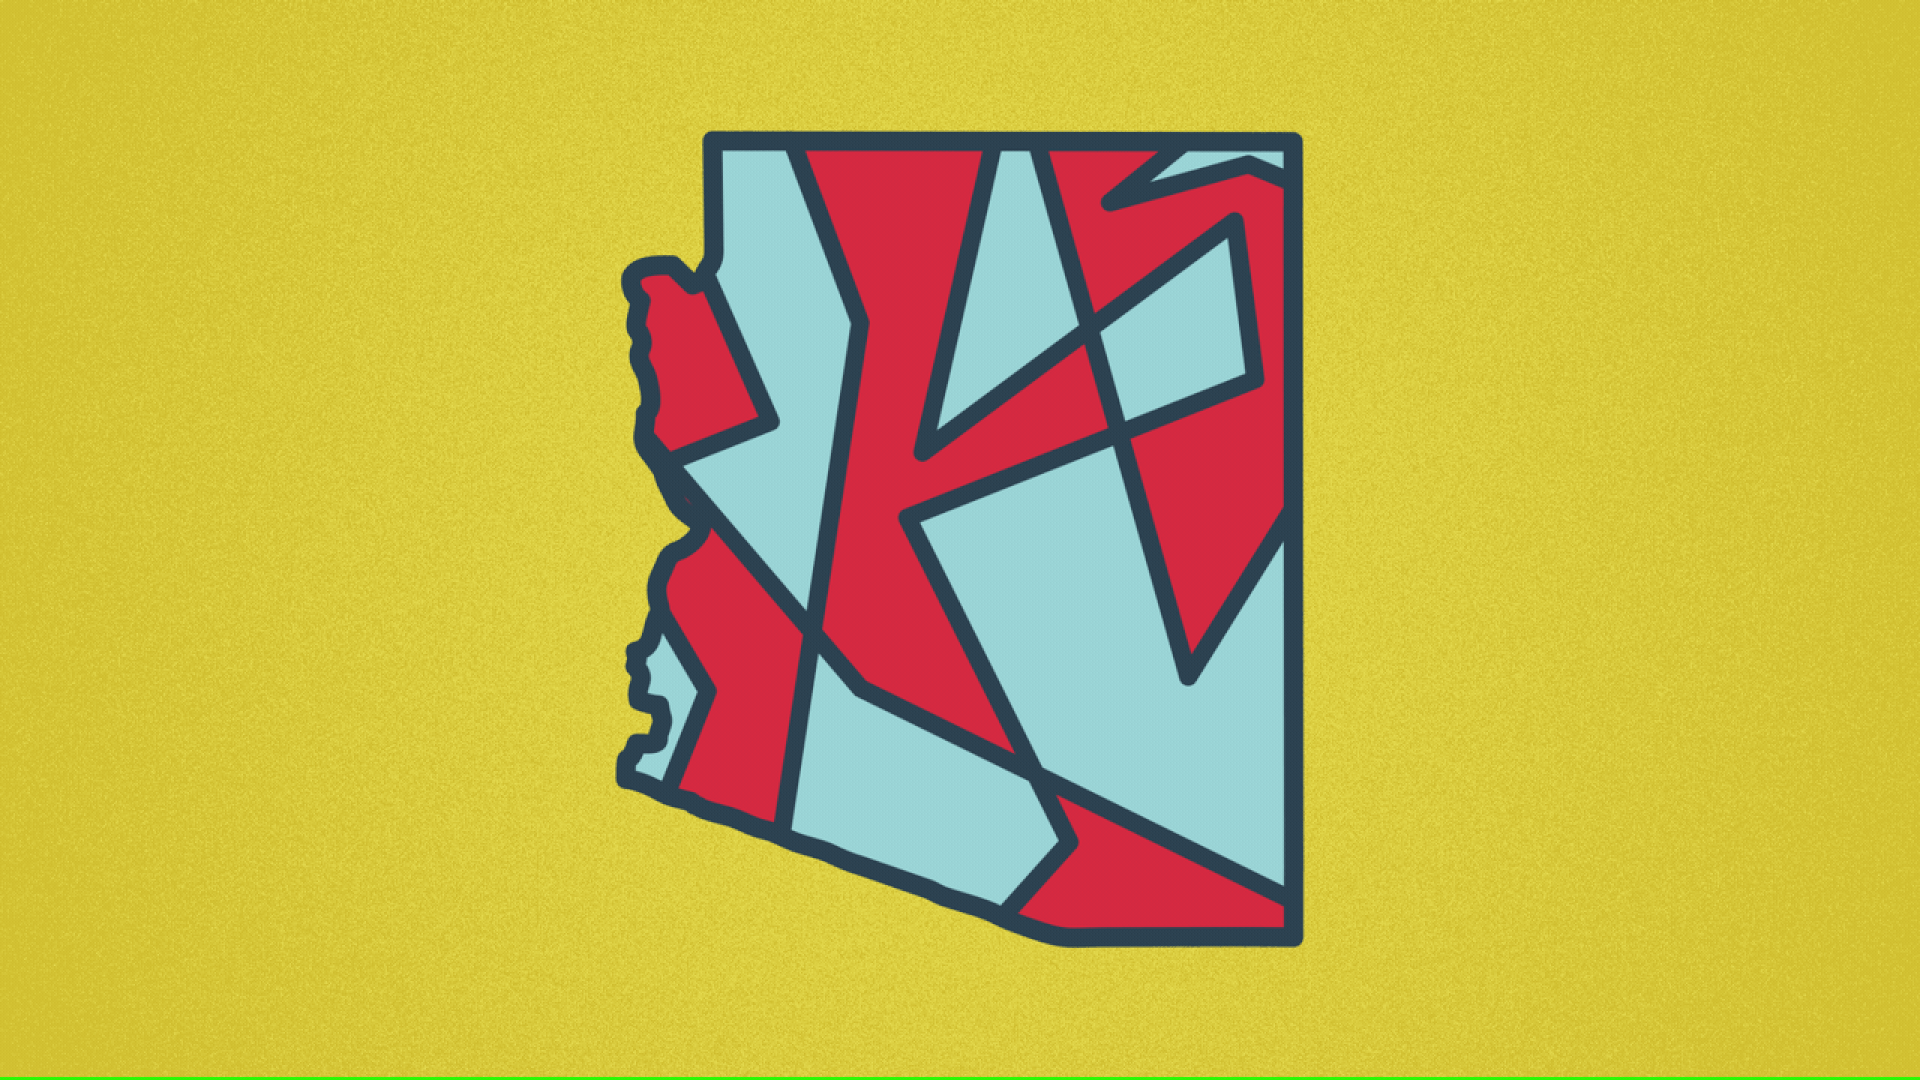 Illustration of the state of Arizona with shifting red and blue districts inside it.